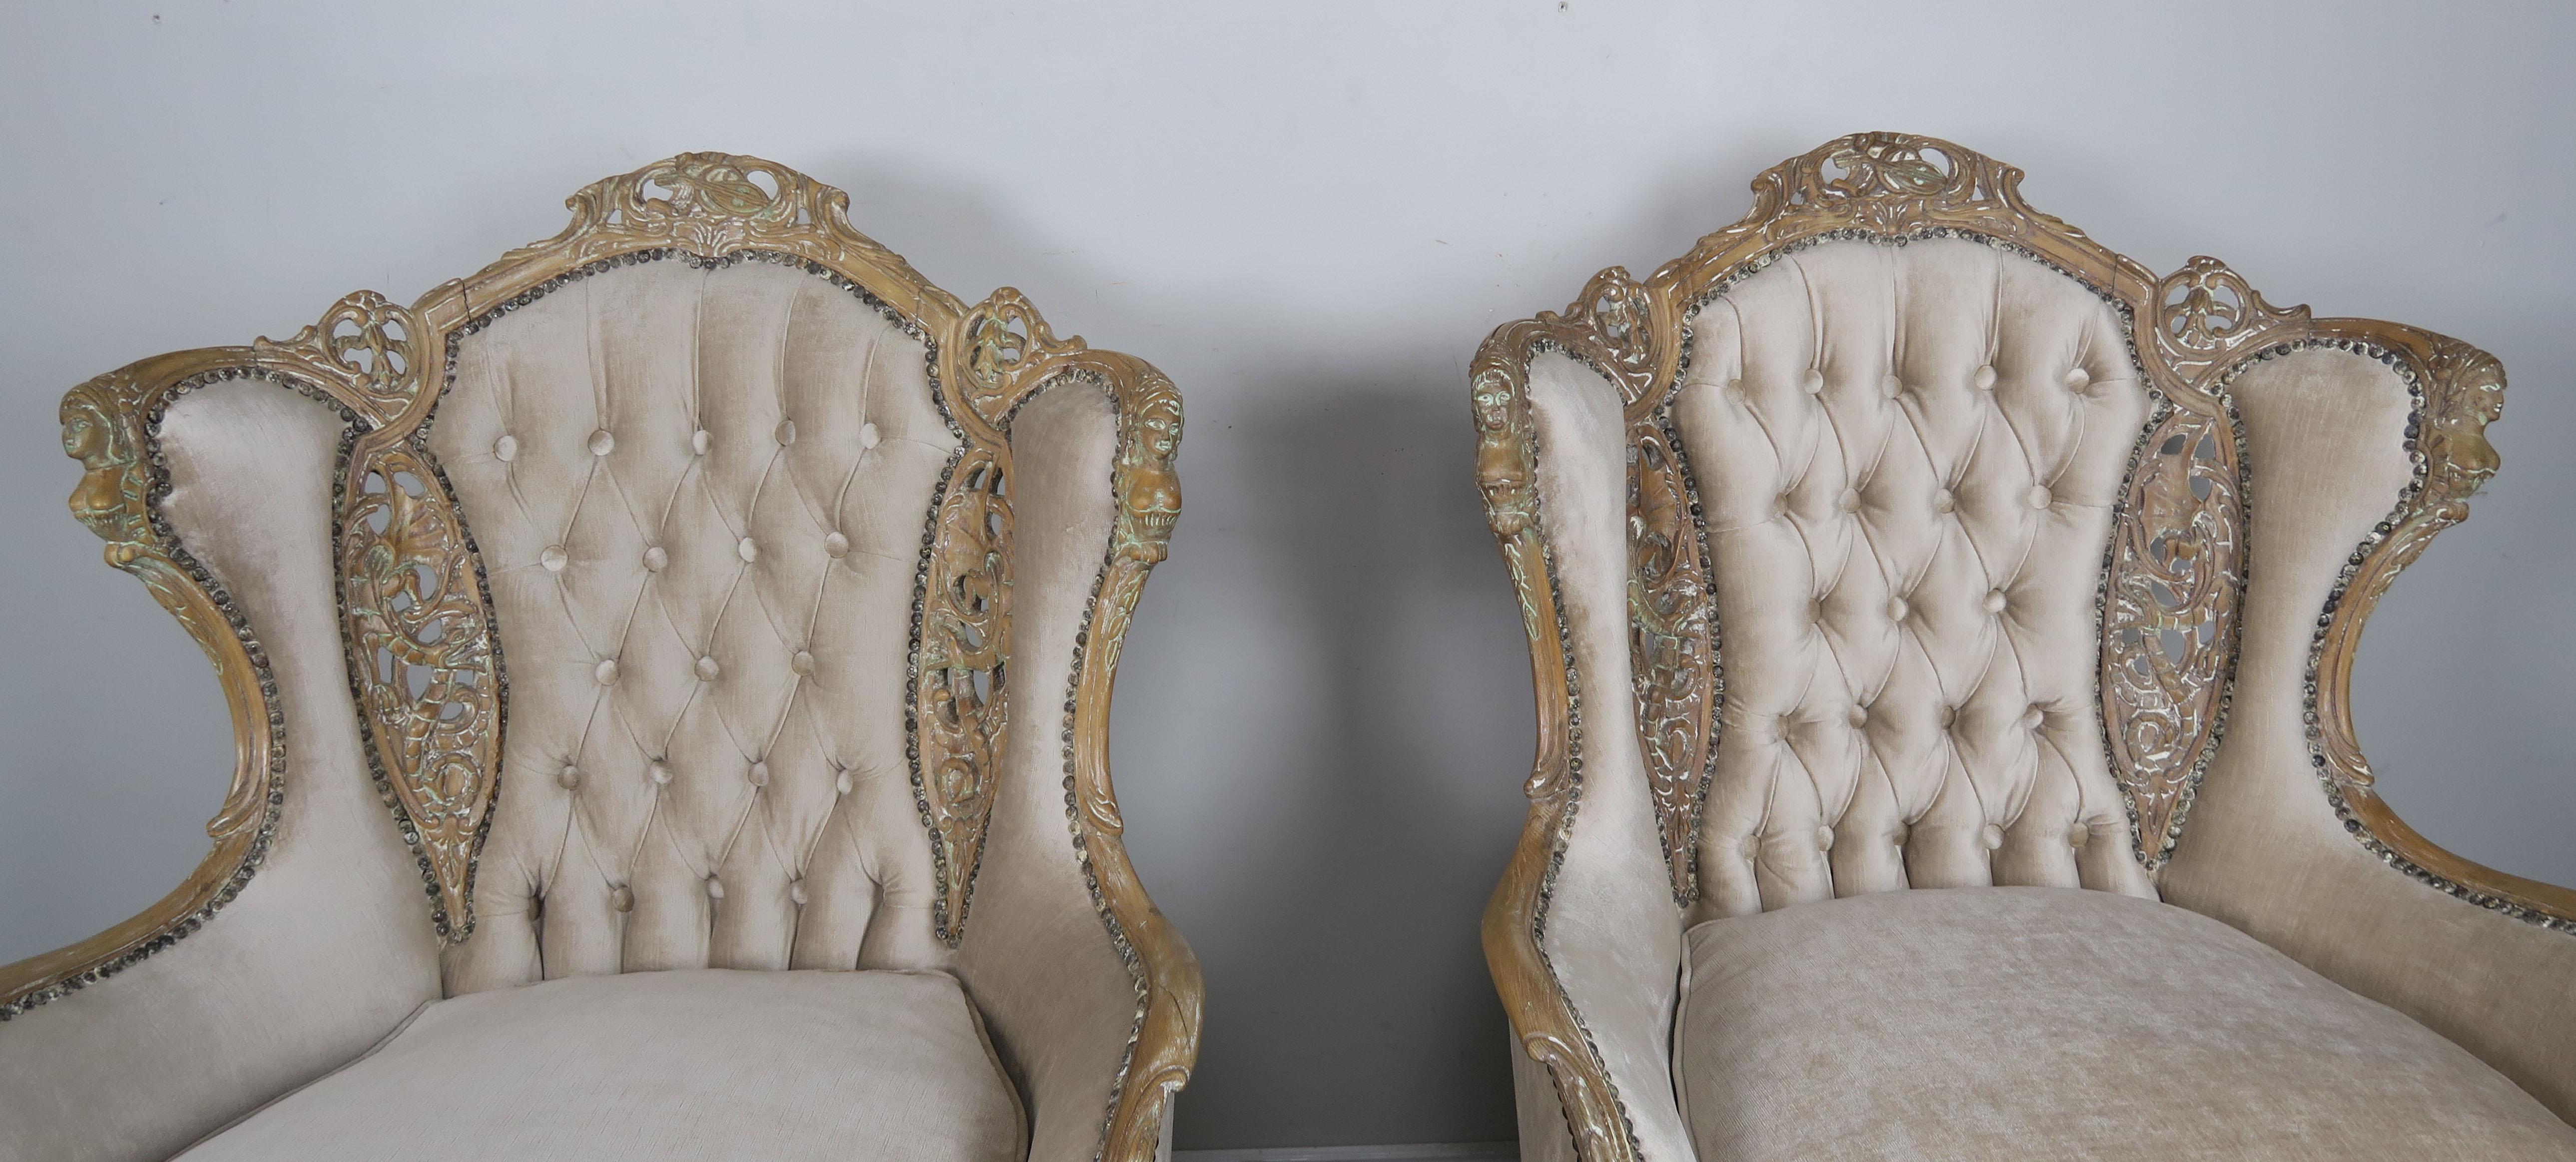 Pair of French Louis XV style cream velvet upholstered bergeres. The back is beautifully tufted and the upholstery is finished with antique brass colored nailhead trim detail. The chairs stand on four cabriole shaped legs with ram's head feet.